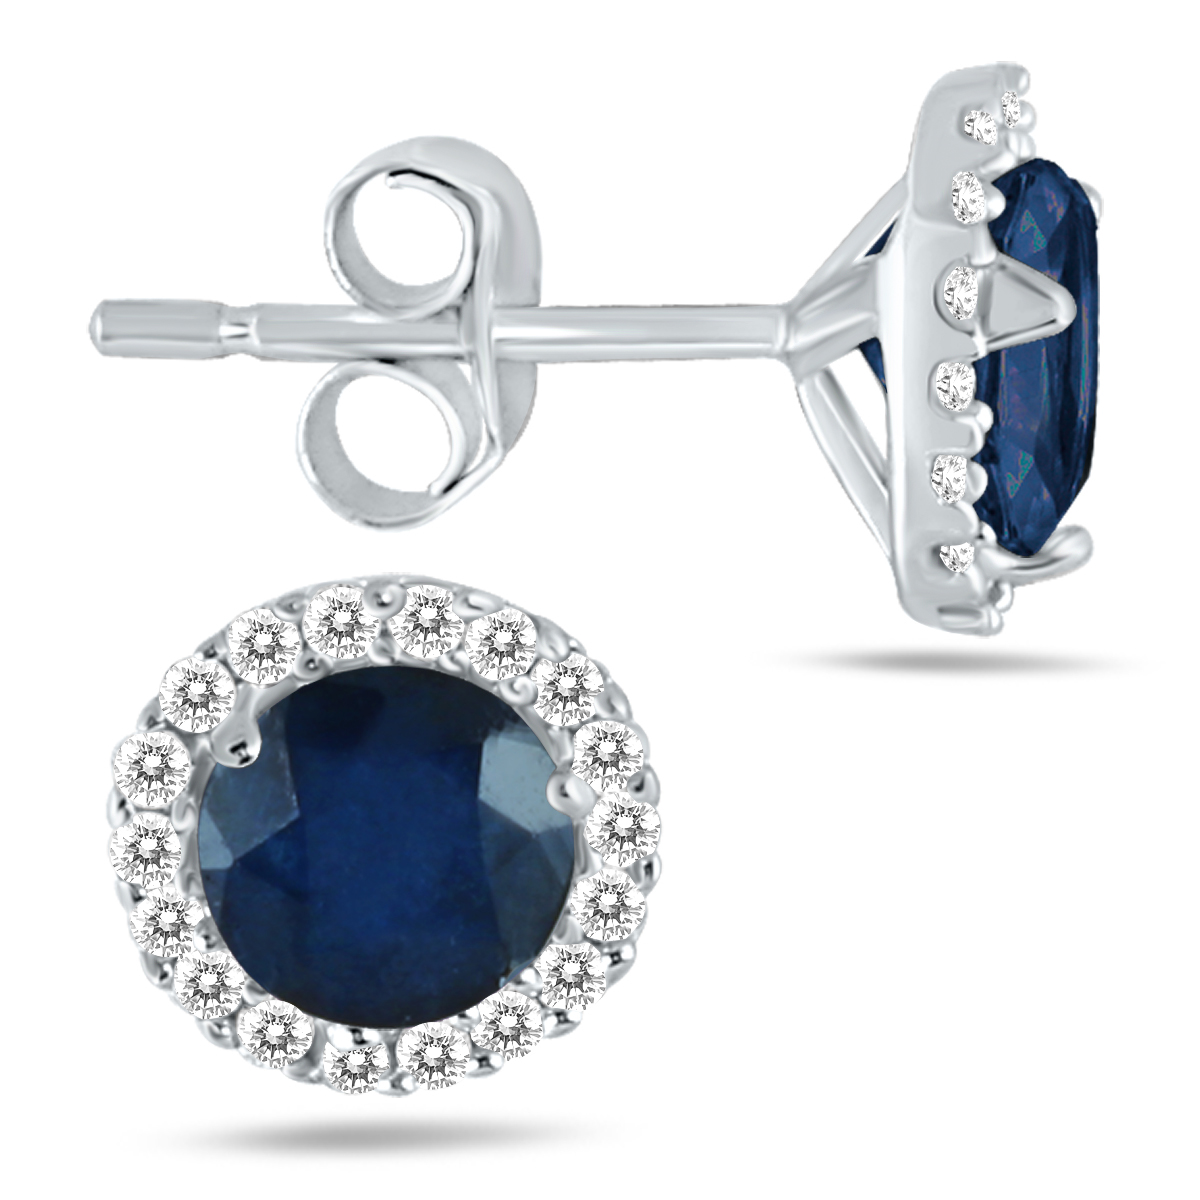 5MM Sapphire and Genuine Diamond Stud Earrings in 14K White Gold